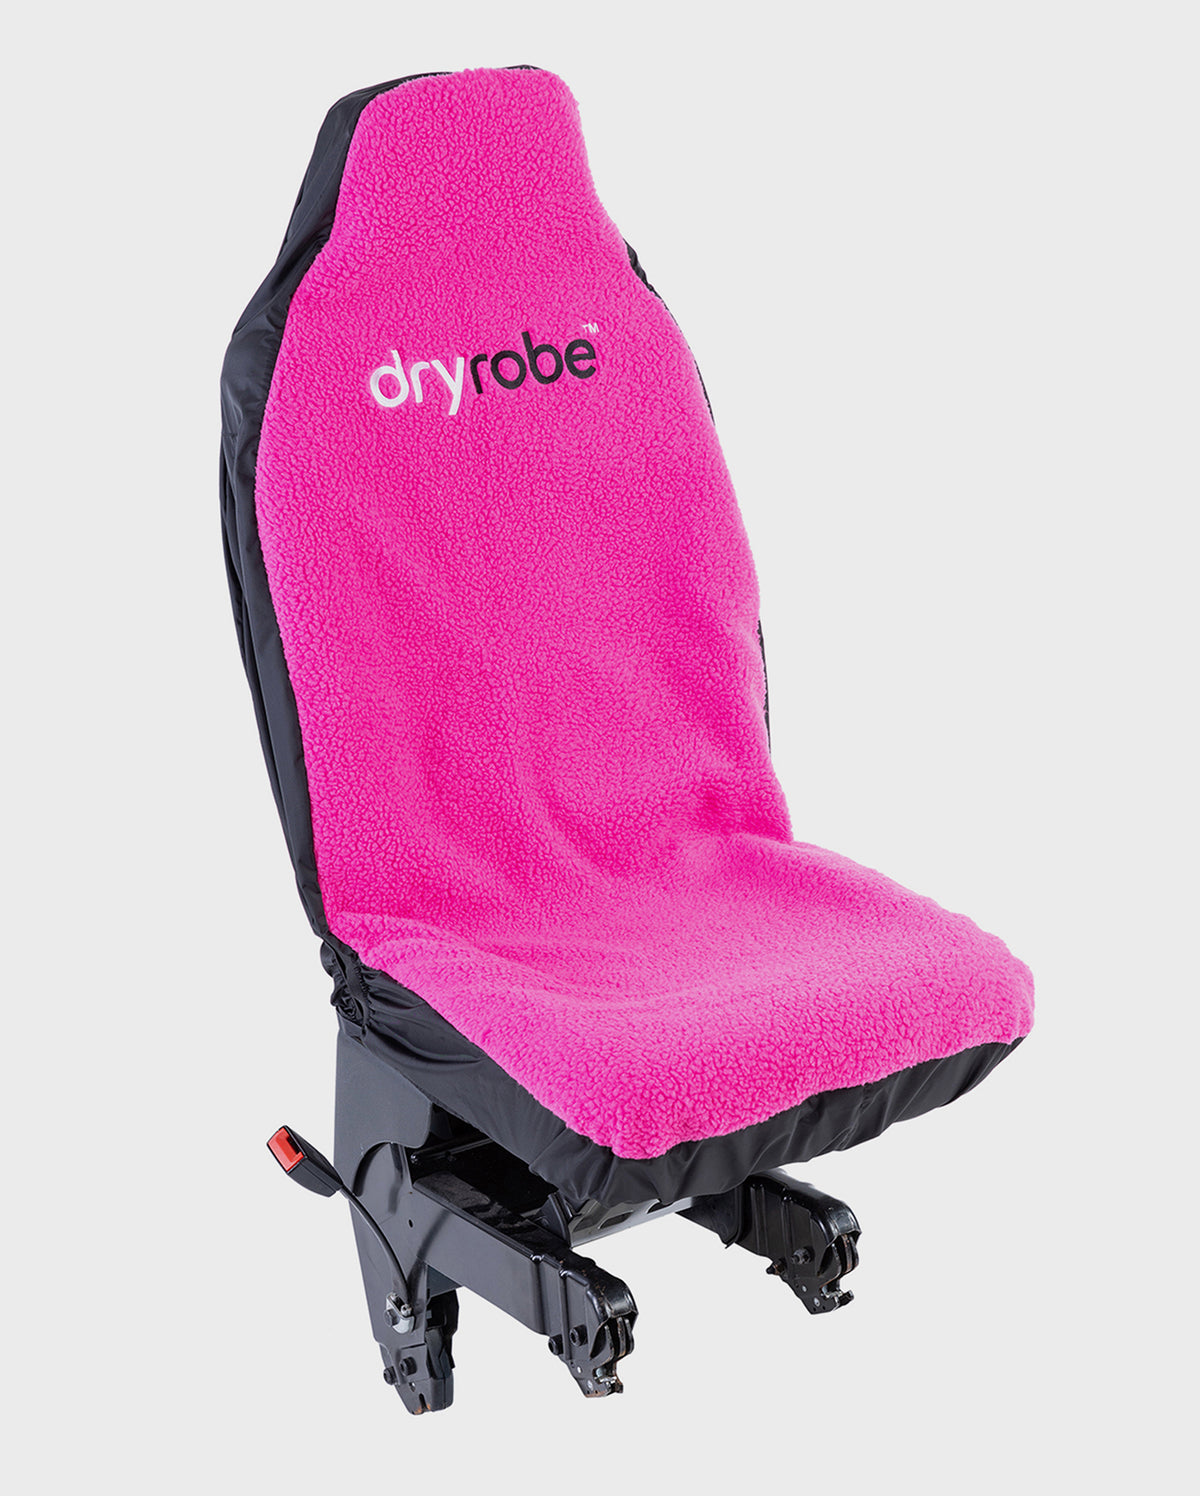 1|Single Pink dryrobe® Water-repellent Car Seat Cover shown on car seat